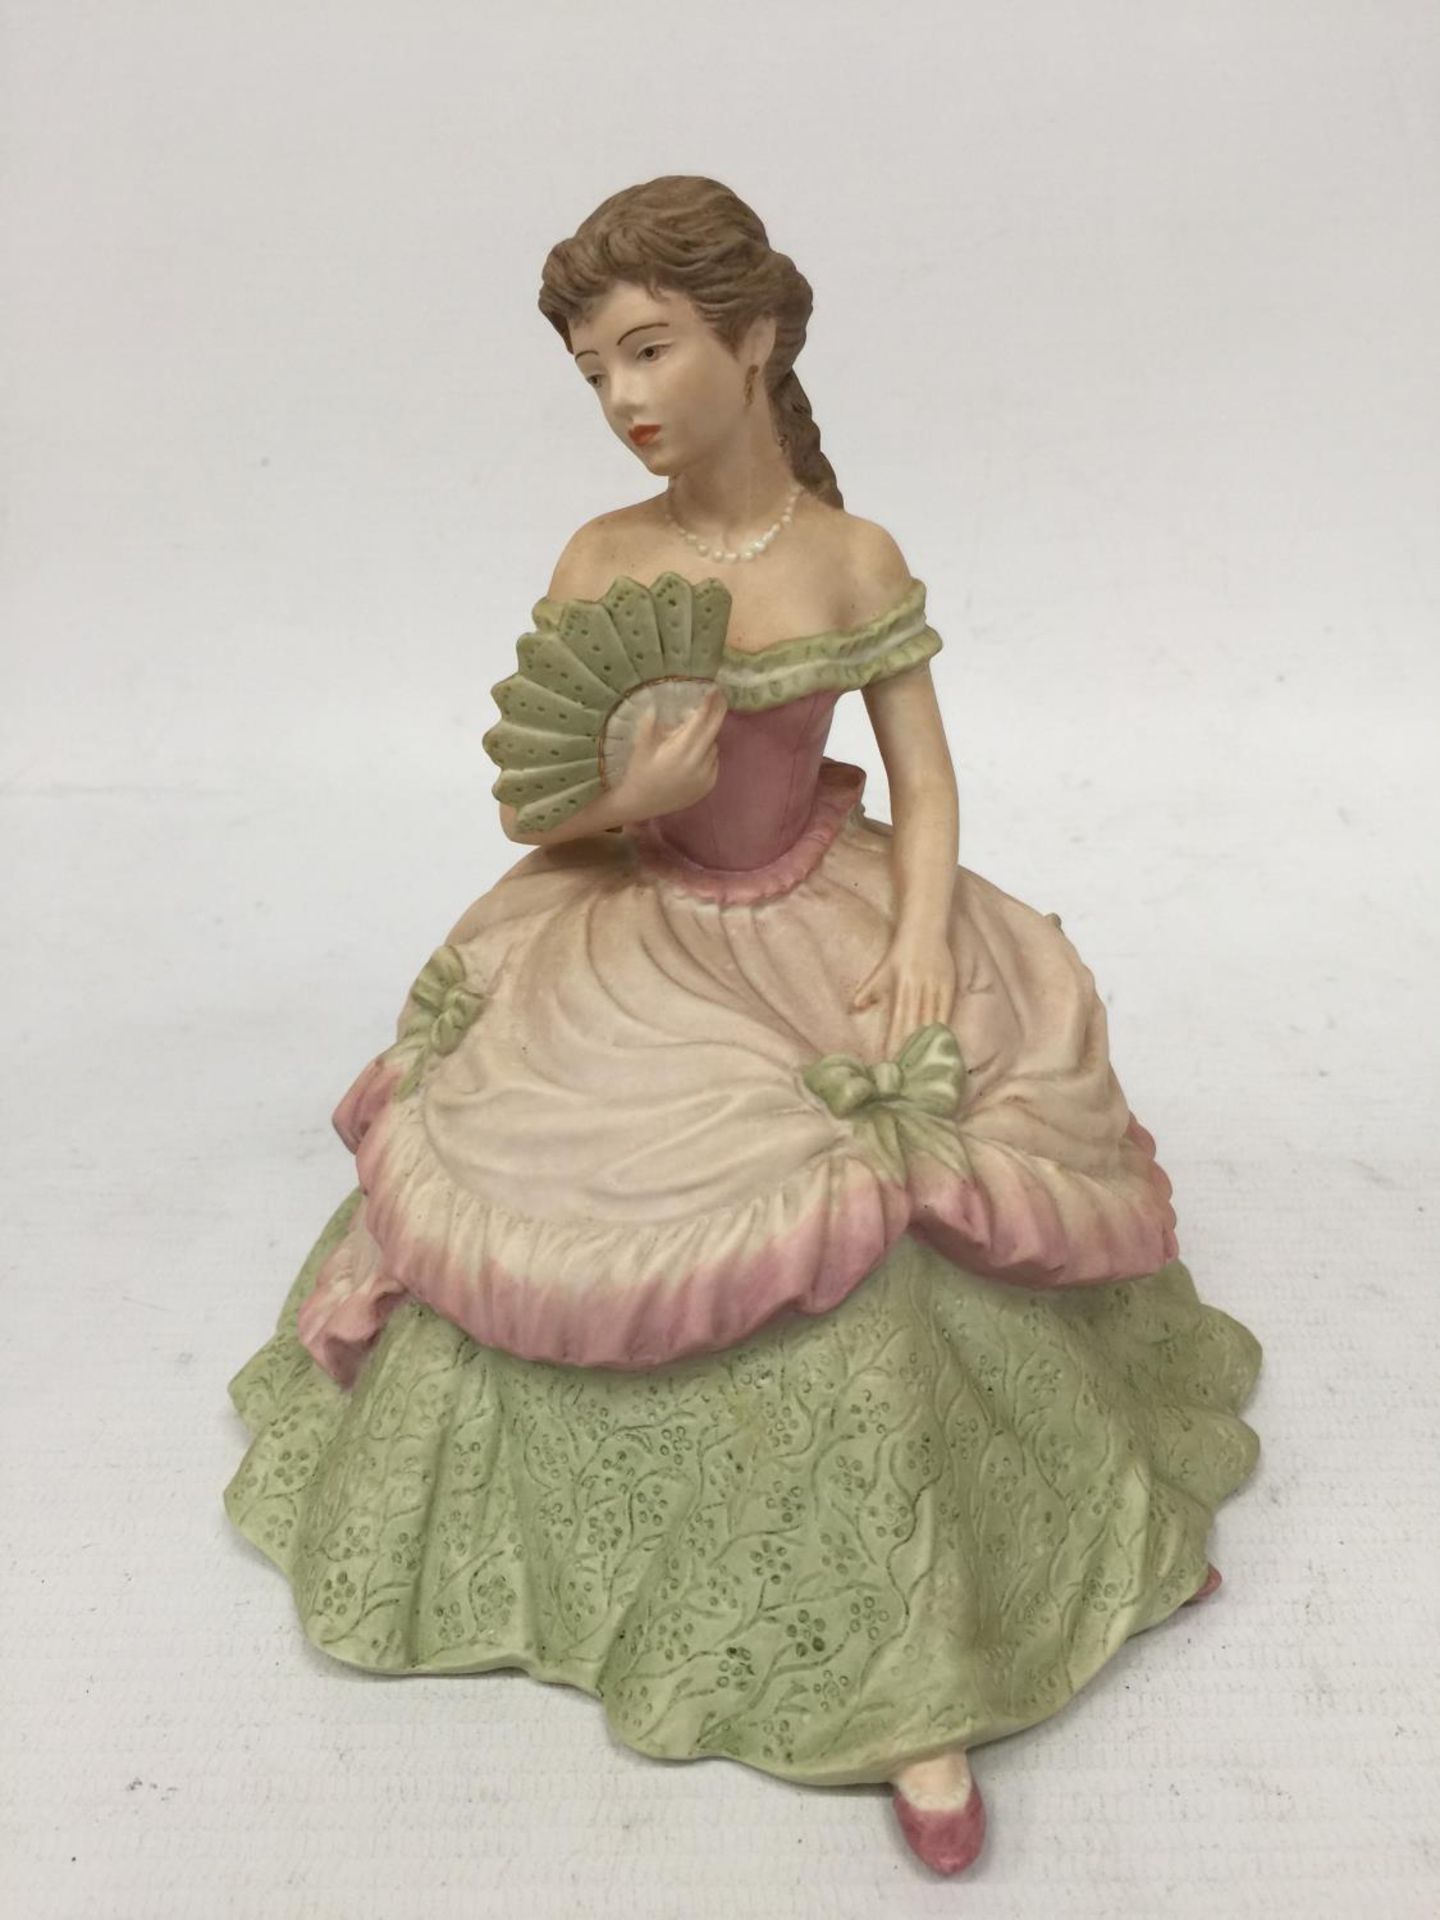 A COALPORT FIGURINE "INTERLUDE" FROM THE AGE OF ELEGANCE COLLECTION 1991 WITH A MATT FINISH - 17 CM